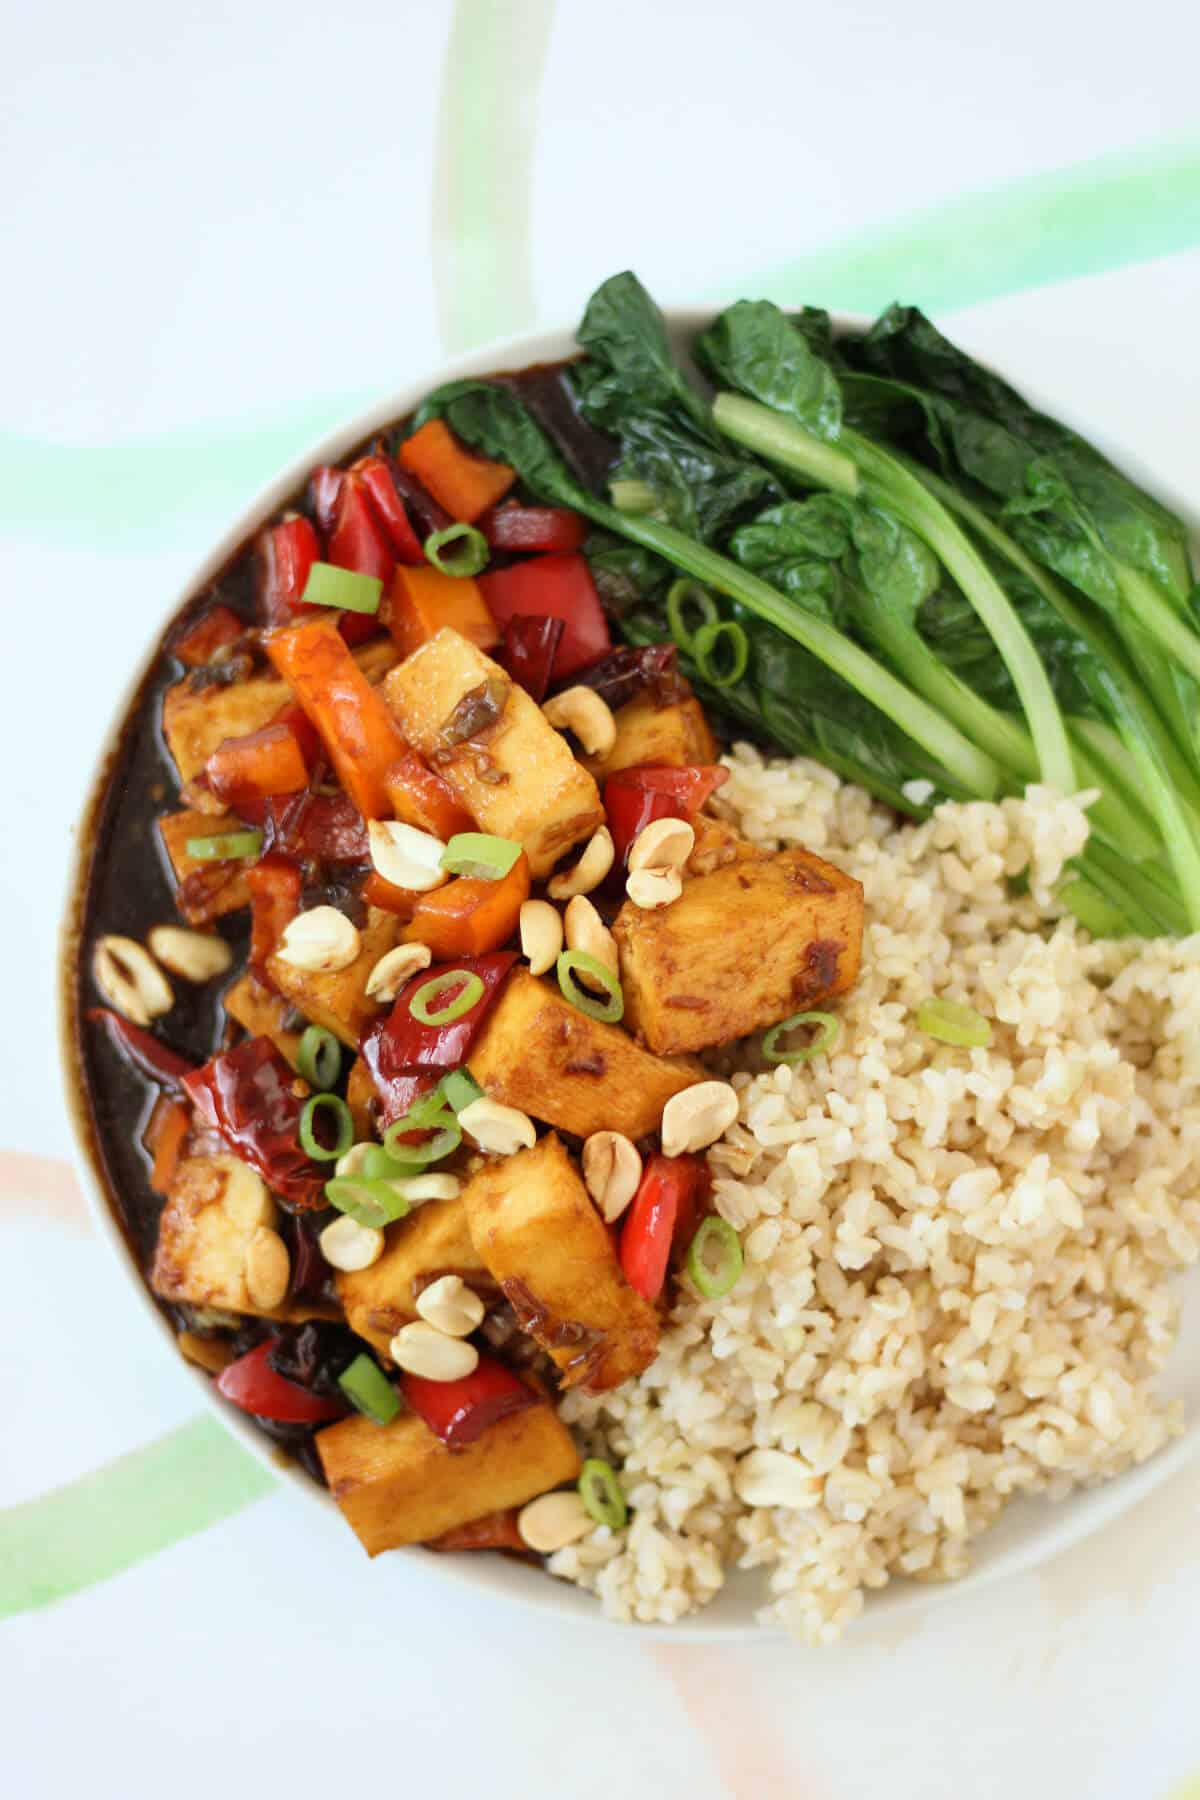 Plate filled with chunks of paneer in a reddish brown gravy, mixed with red bell peppers, golden peanuts and sliced green onions. The rest of the plate is filled with steamed green leafy vegetables and steamed brown rice.